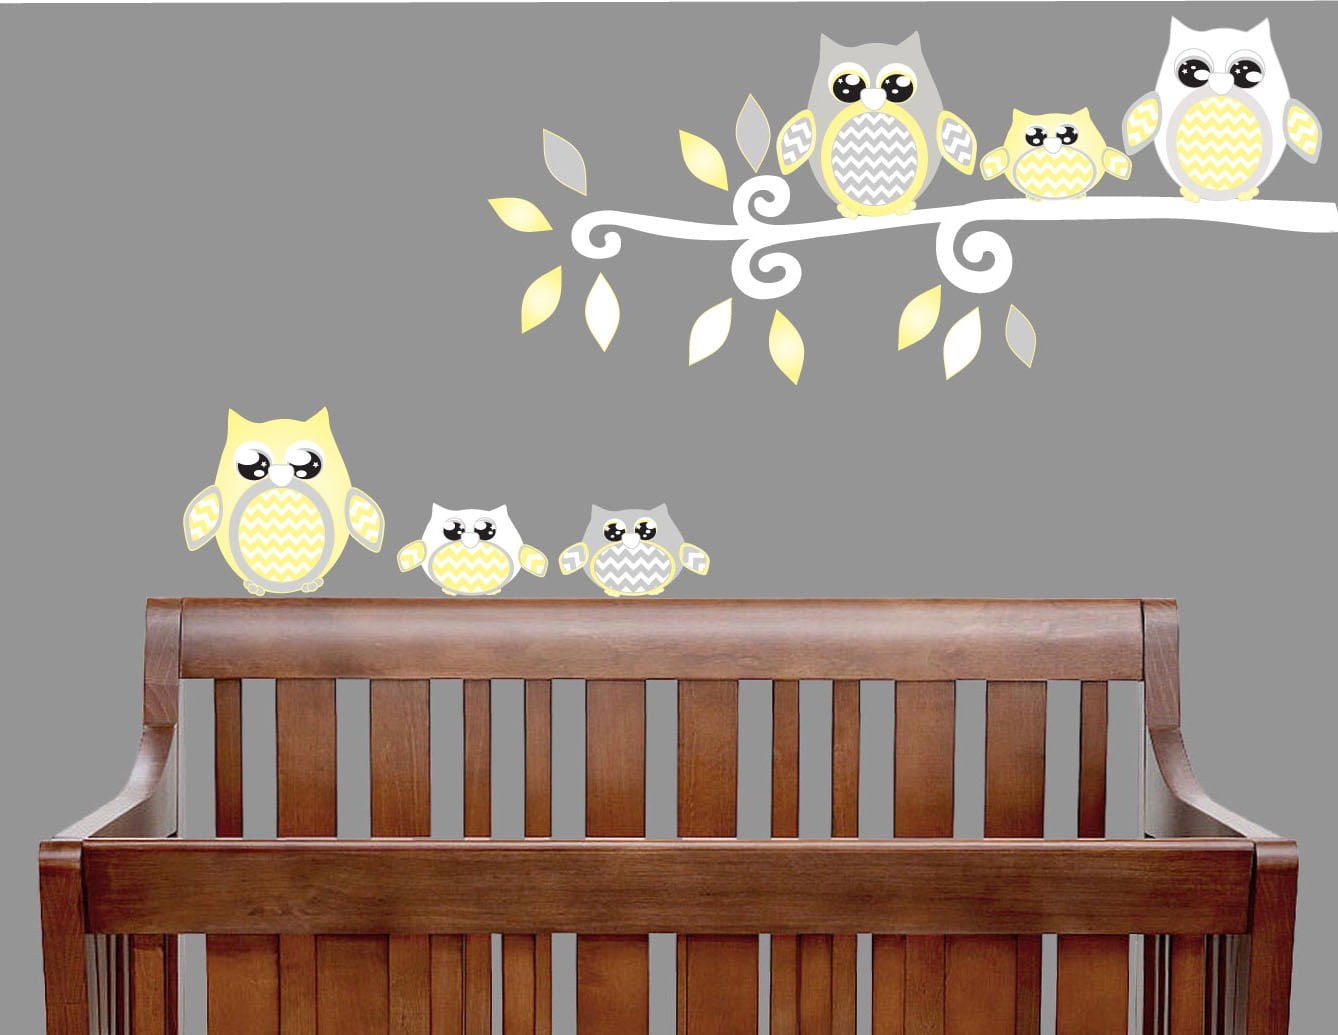 Details about  / Cartoon Owl Animal Children Baby Bedroom Wall Sticker For Kids Rooms Eagle Hawk